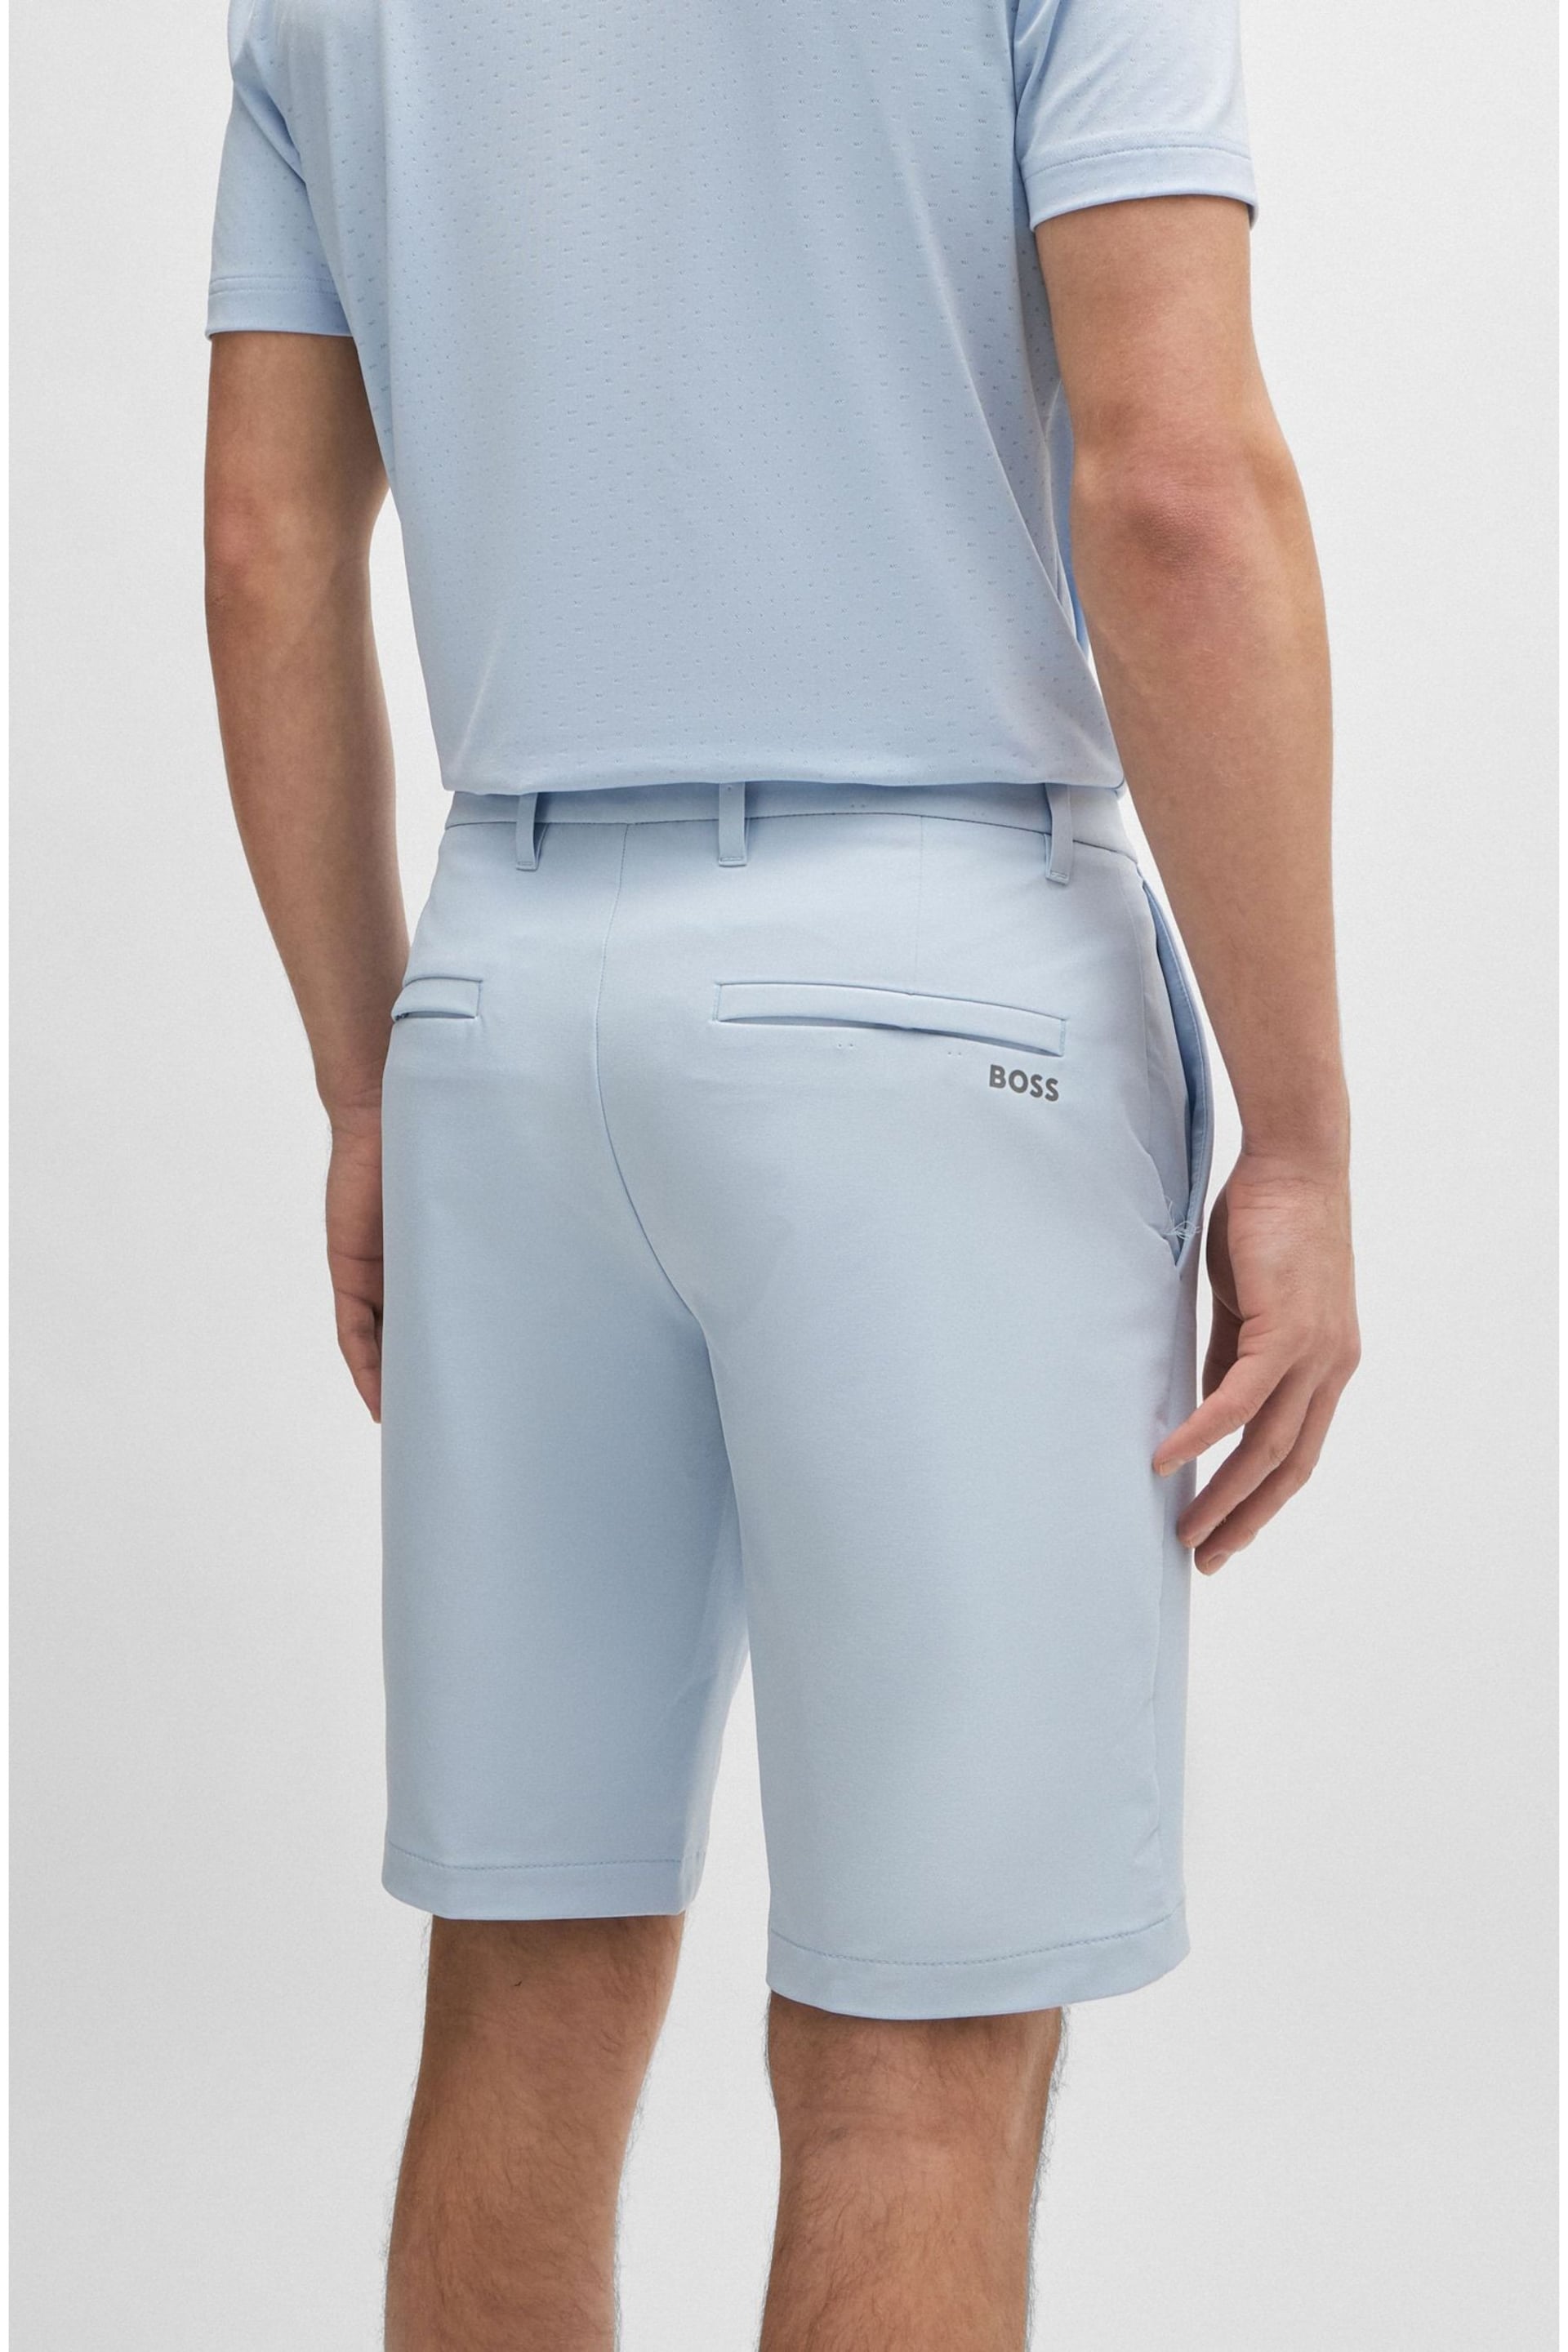 BOSS Light Blue Slim Fit Shorts in Water Repellent Easy Iron Fabric - Image 4 of 5